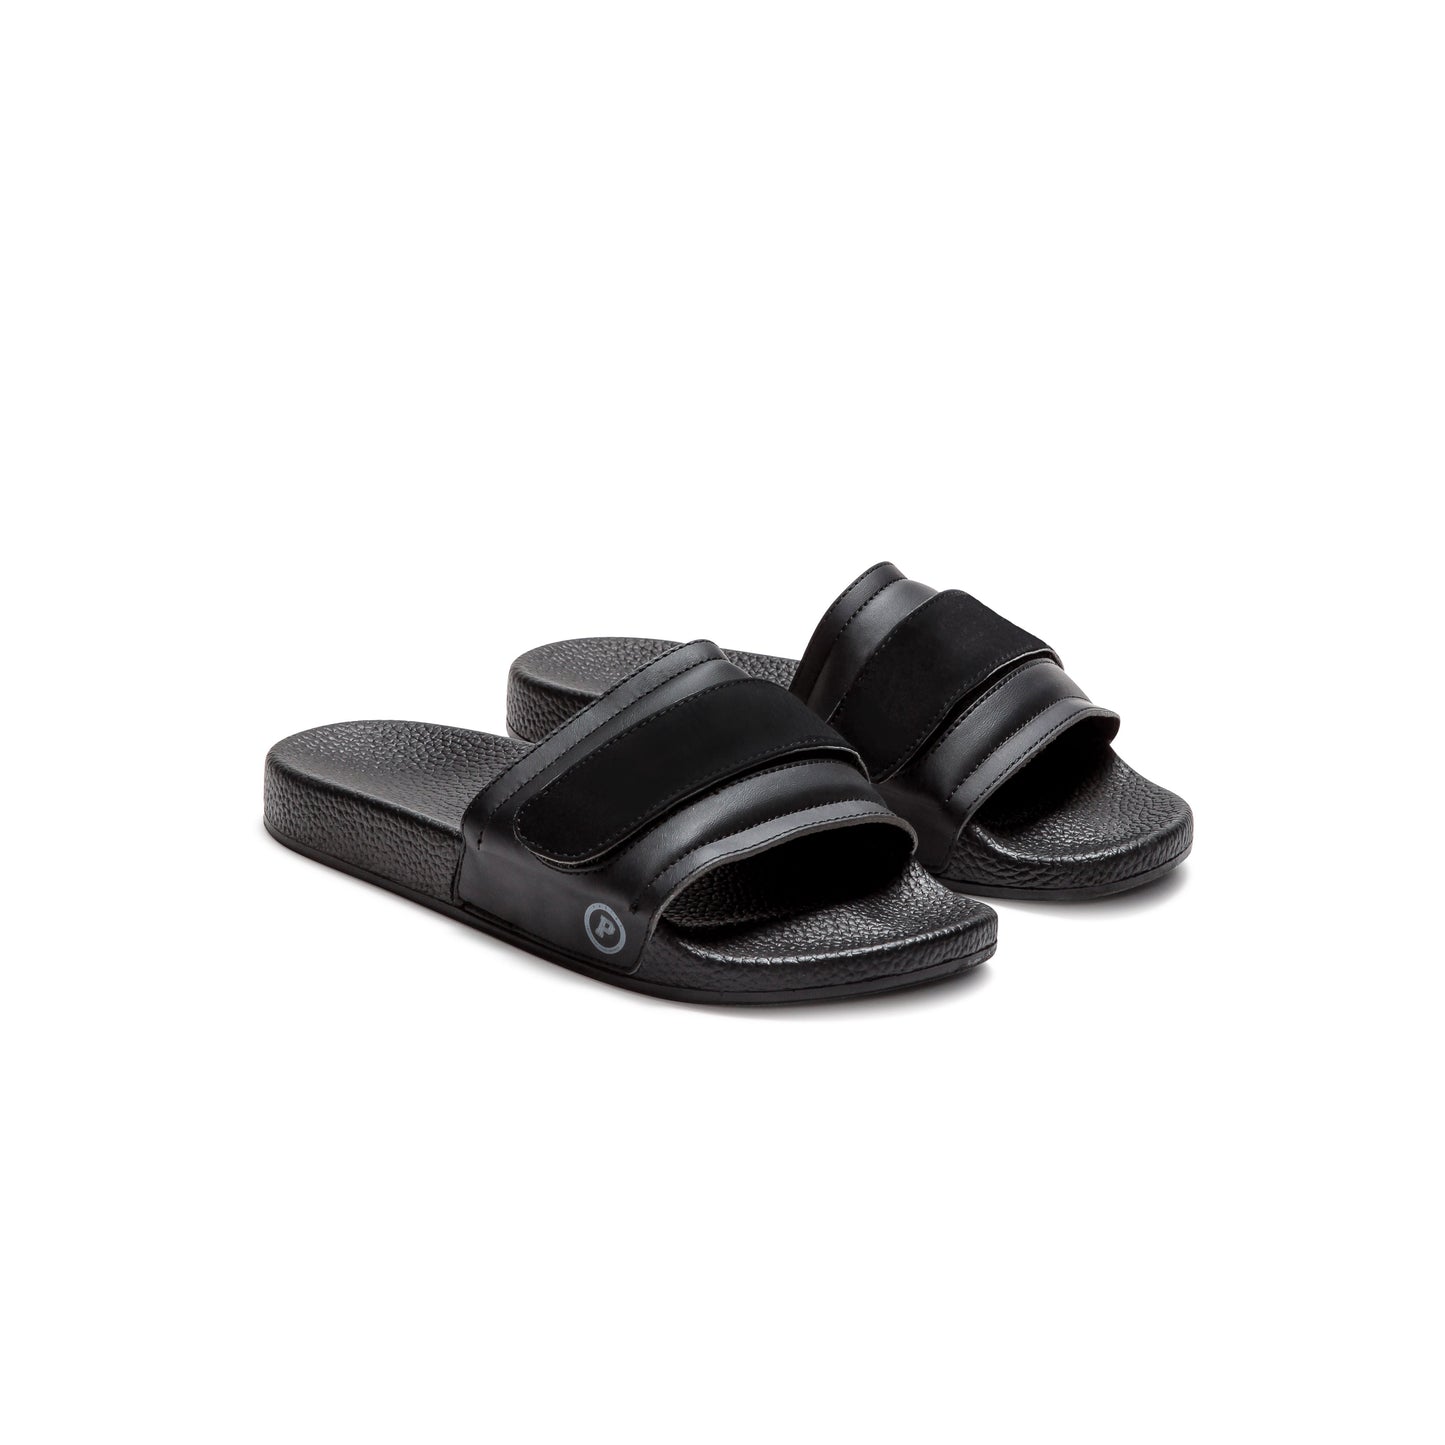 Pair of Pastry Recovery Slide with Strap Kit in Black